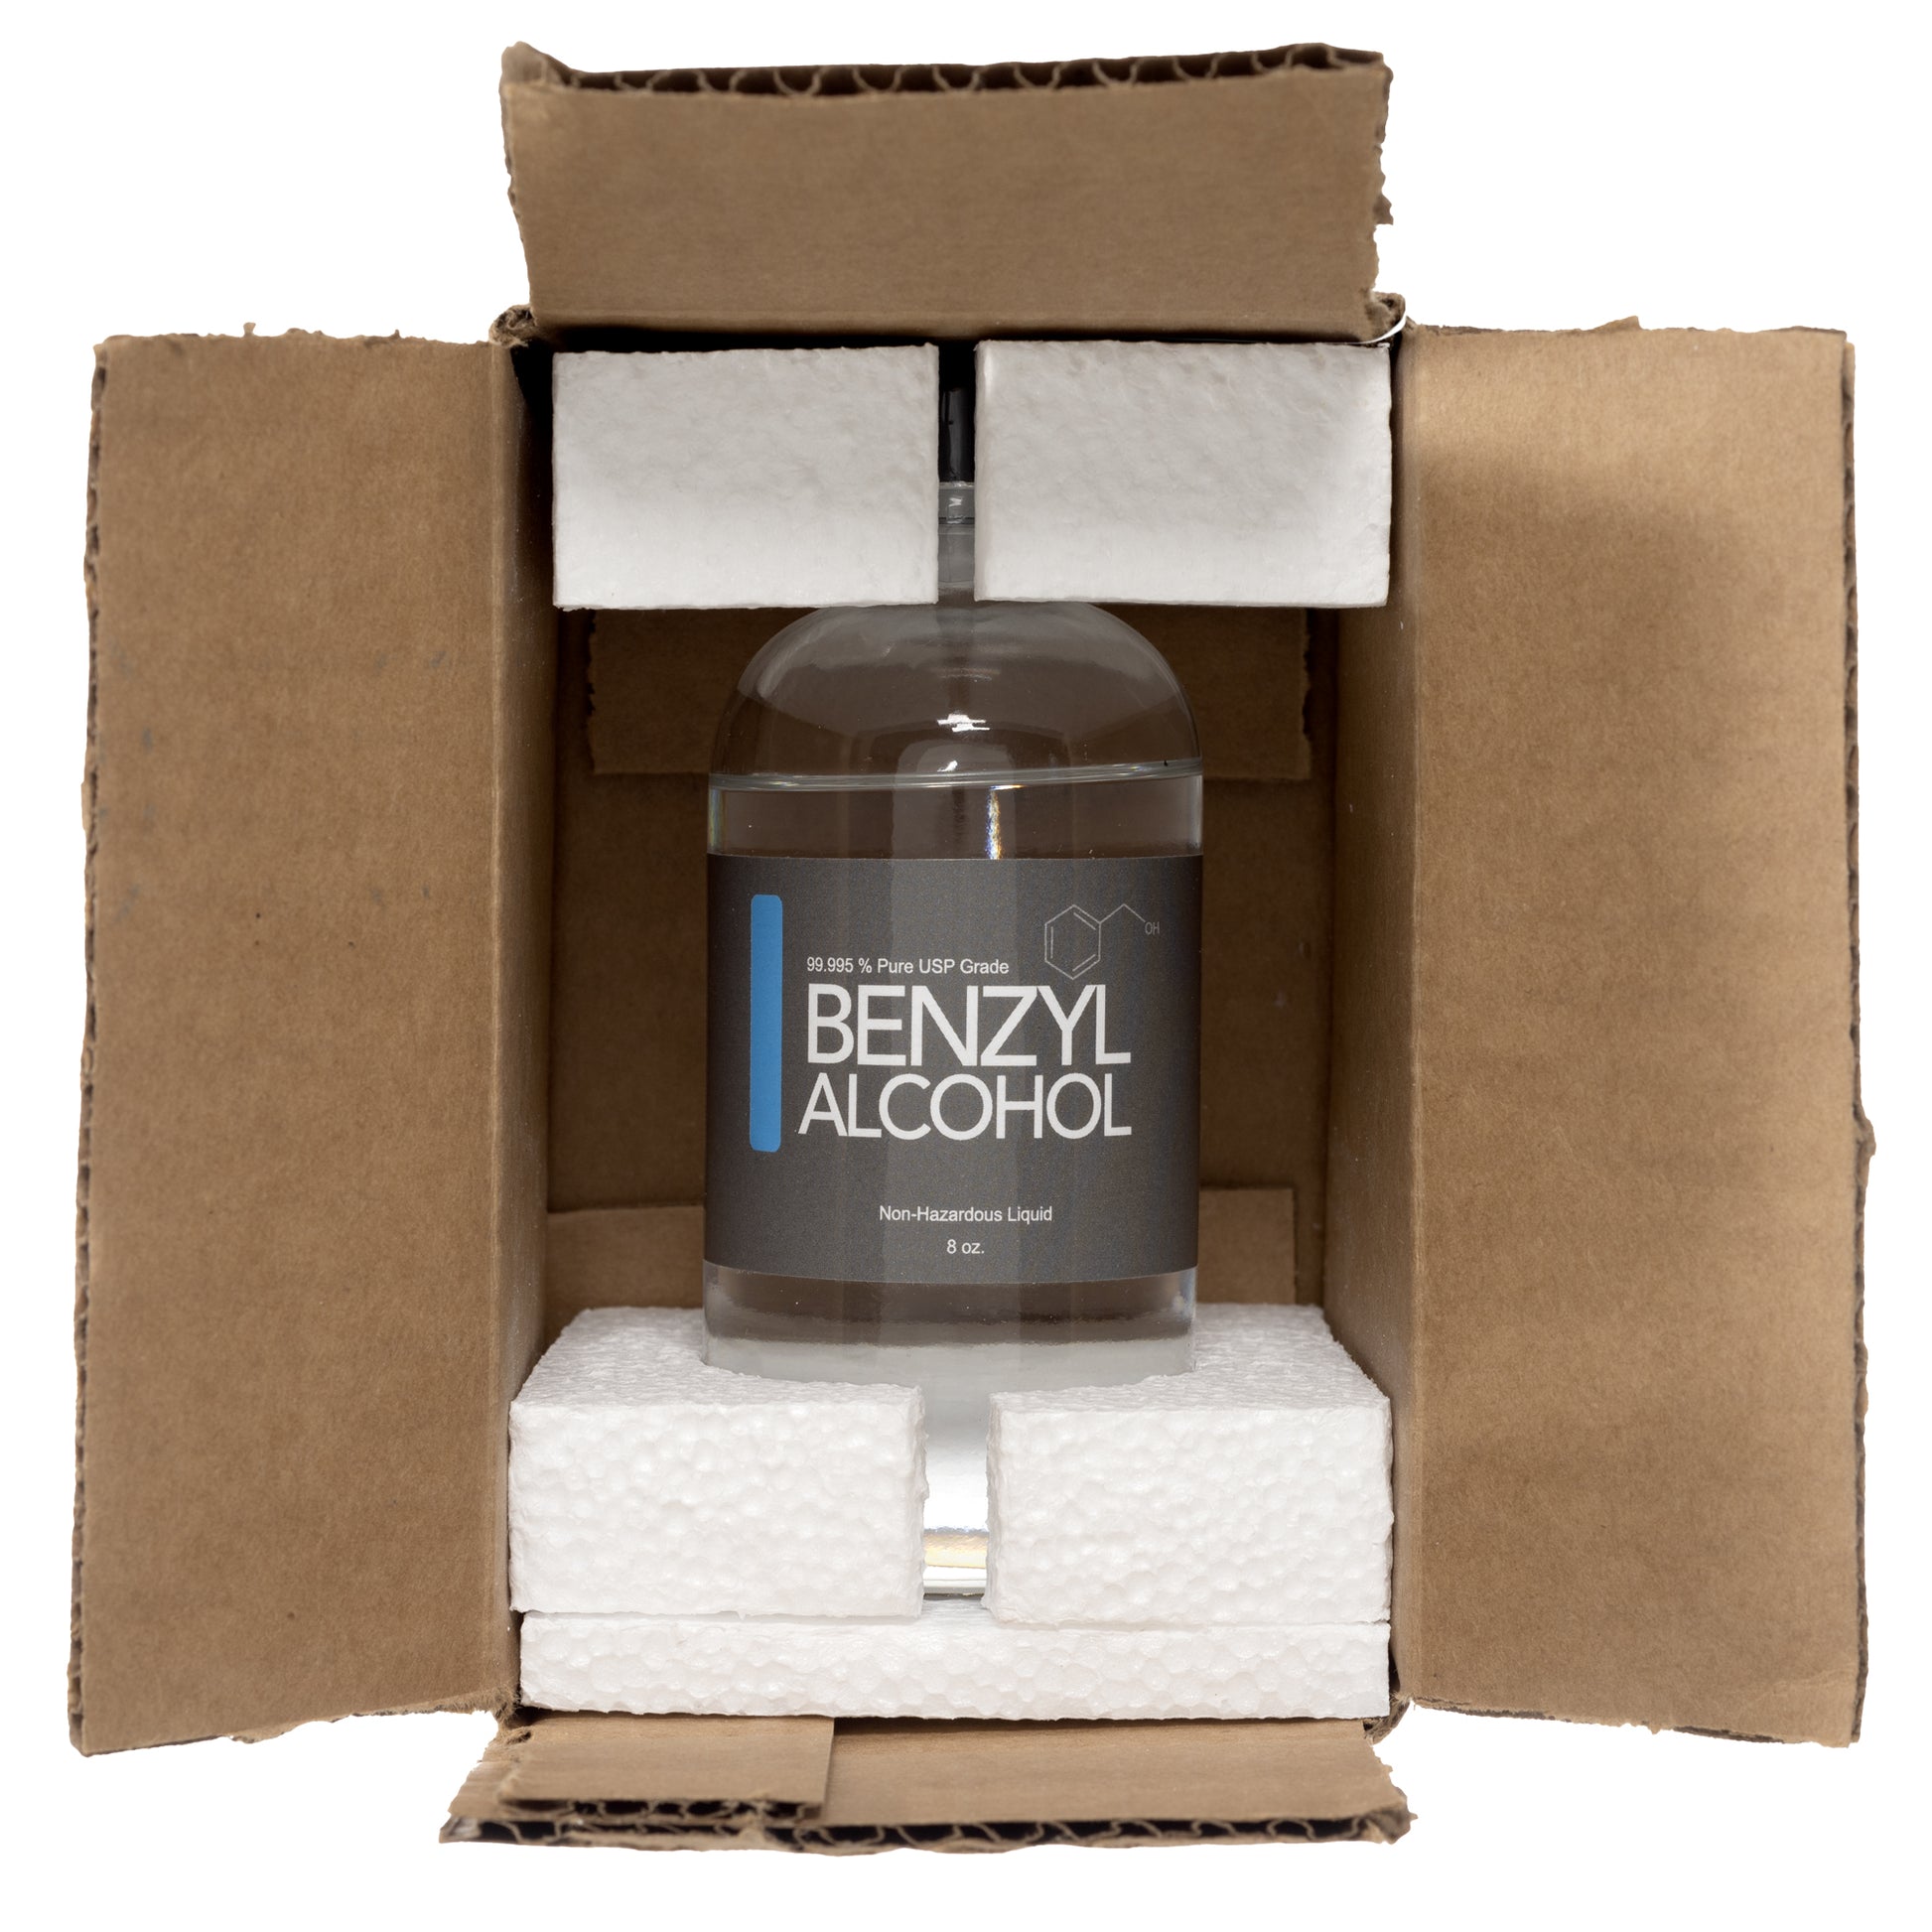 Clear glass bottle with a black plastic twist off cap. Label reads "Benzyl Alcohol non hazardous liquid" 8 oz. Product is shown inside of a brown cardboard box. There is Styrofoam on the top and the bottle of the glass bottle.  